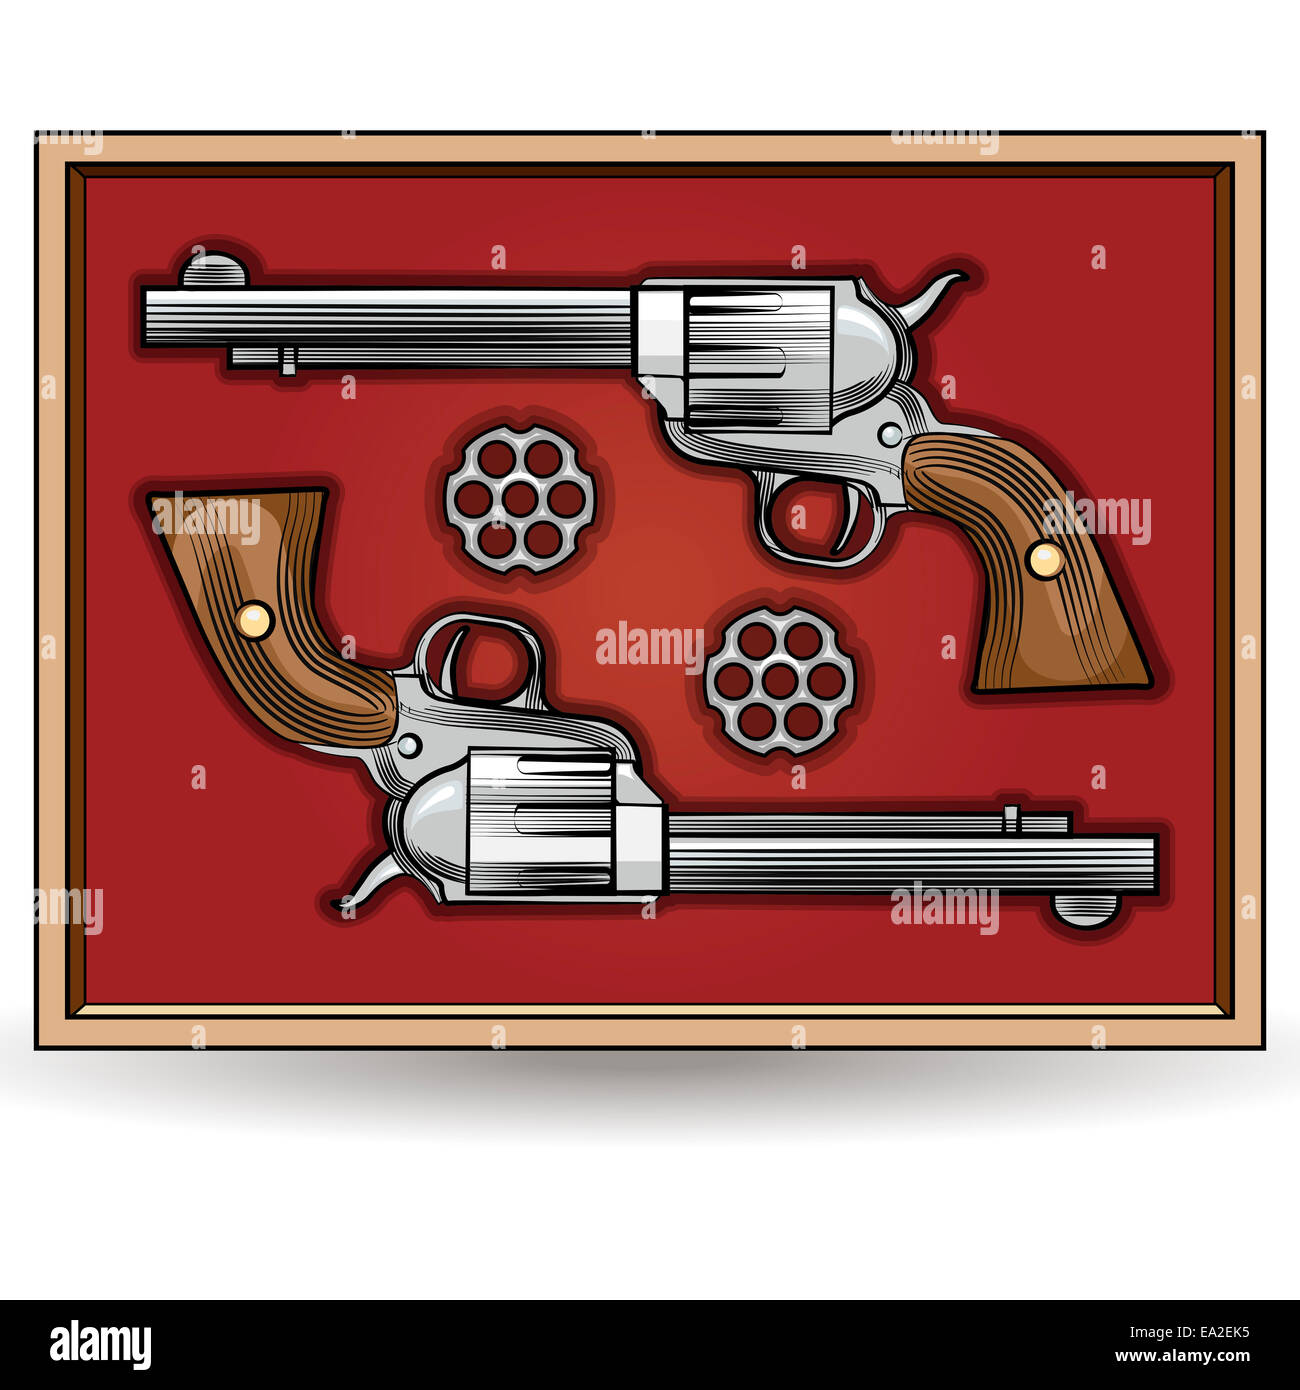 Set of revolvers drawn in vintage style Stock Photo